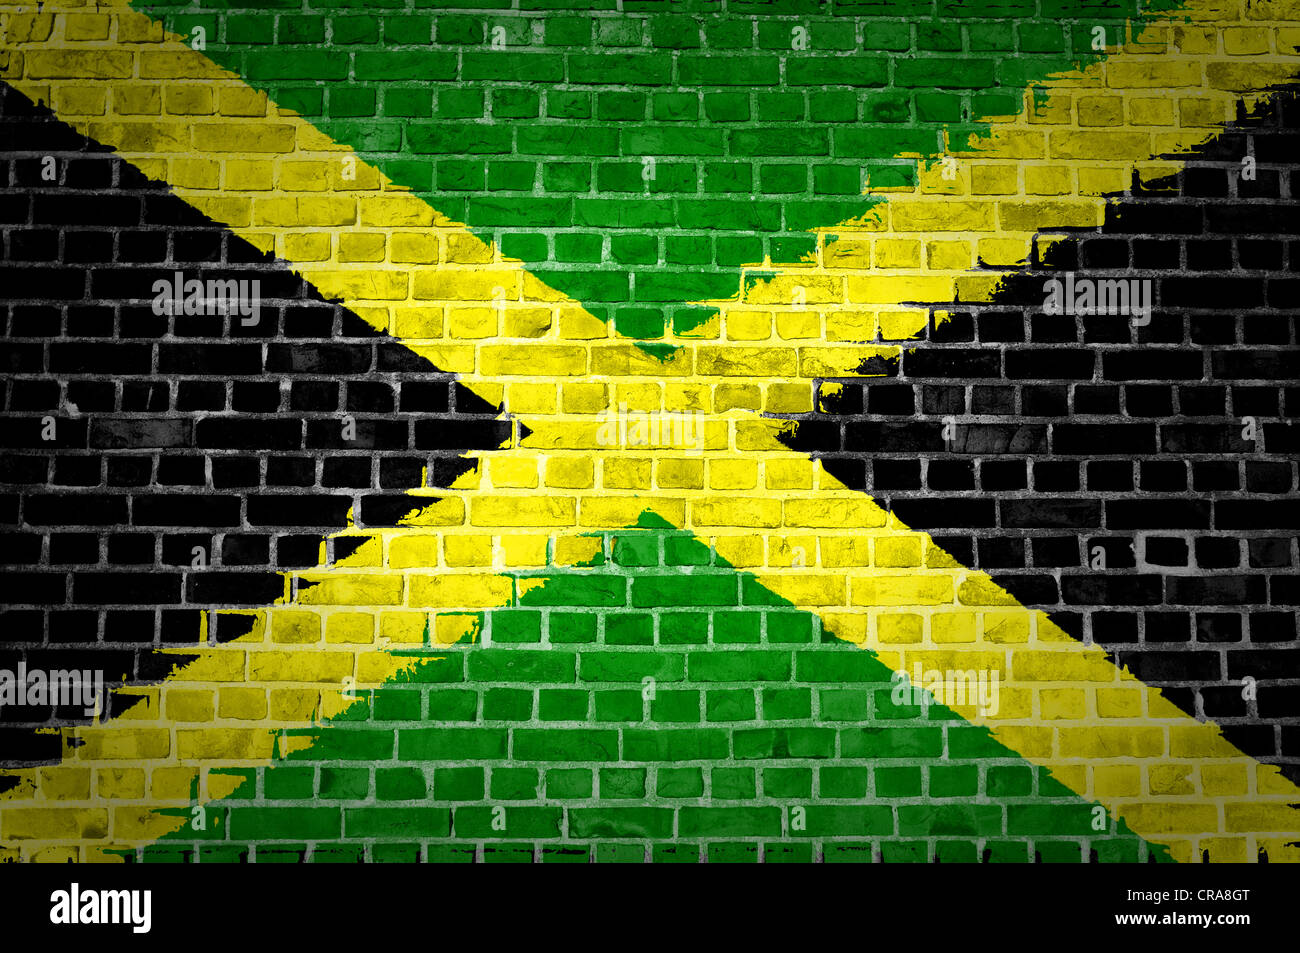 An image of the Jamaica flag painted on a brick wall in an urban location Stock Photo